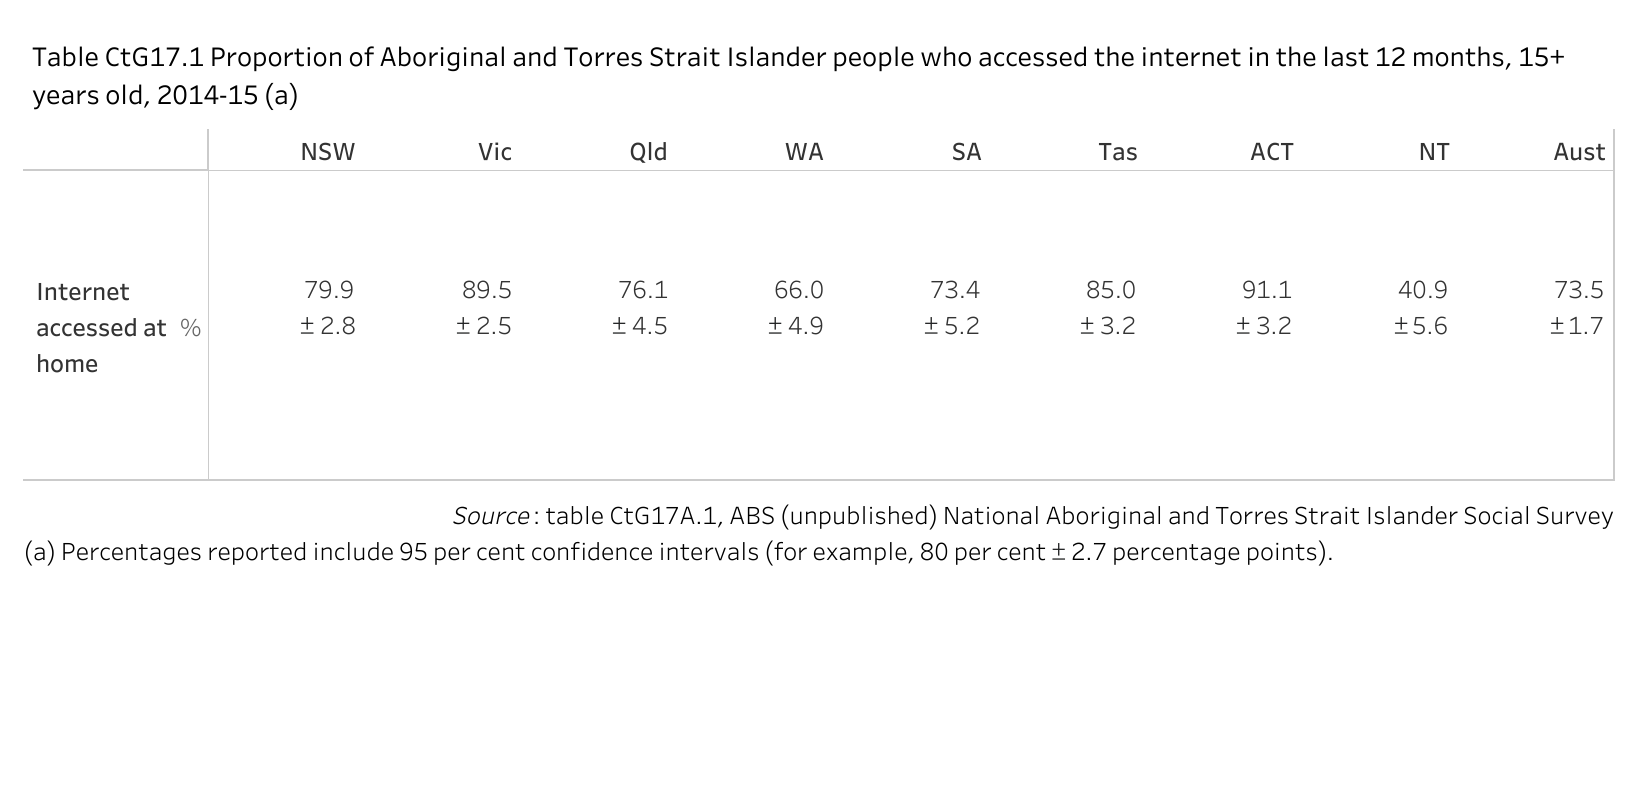 Table CtG17.1 Table showing the proportion of Aboriginal and Torres Strait Islander people aged 15 years and over who have accessed the internet from home in the last 12 months. The aim under Closing the Gap is for Aboriginal and Torres Strait Islander people to achieve the same level (ie parity) of home internet access to non-Indigenous people by 2026. As comparable data are not currently available for non-Indigenous people the gap to achieving parity is unknown.